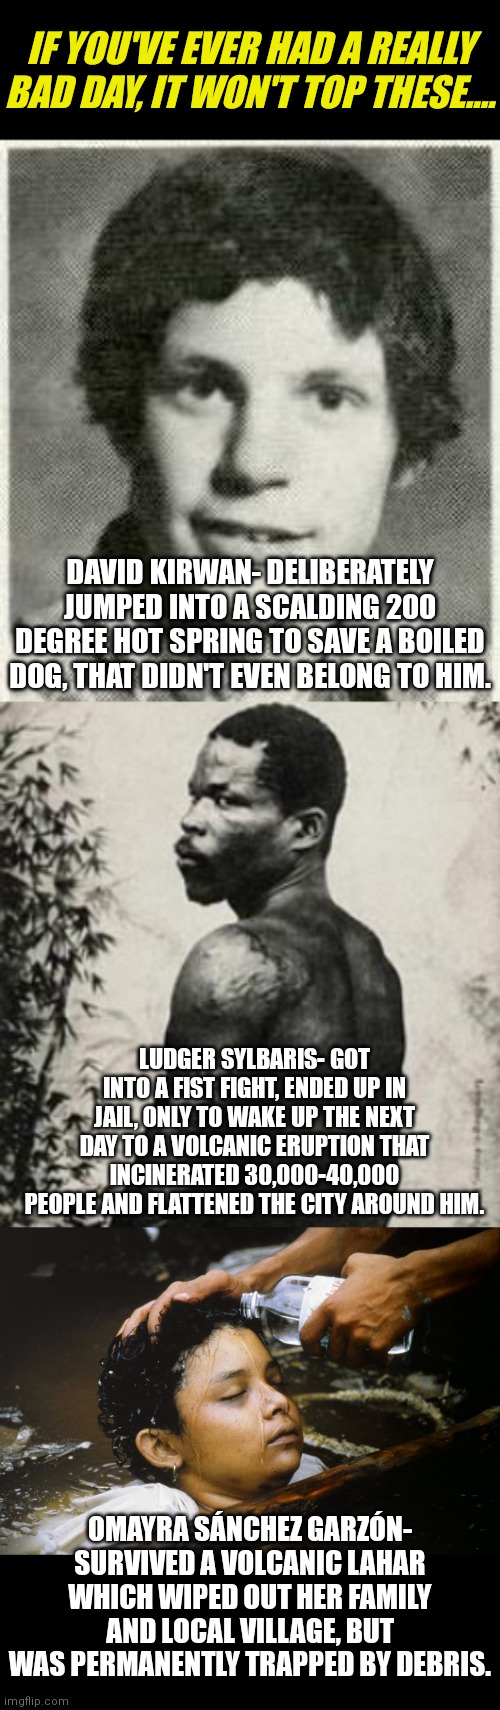 Maybe the things you complain about ain't that important? | IF YOU'VE EVER HAD A REALLY BAD DAY, IT WON'T TOP THESE.... DAVID KIRWAN- DELIBERATELY JUMPED INTO A SCALDING 200 DEGREE HOT SPRING TO SAVE A BOILED DOG, THAT DIDN'T EVEN BELONG TO HIM. LUDGER SYLBARIS- GOT INTO A FIST FIGHT, ENDED UP IN JAIL, ONLY TO WAKE UP THE NEXT DAY TO A VOLCANIC ERUPTION THAT INCINERATED 30,000-40,000 PEOPLE AND FLATTENED THE CITY AROUND HIM. OMAYRA SÁNCHEZ GARZÓN- SURVIVED A VOLCANIC LAHAR WHICH WIPED OUT HER FAMILY AND LOCAL VILLAGE, BUT WAS PERMANENTLY TRAPPED BY DEBRIS. | image tagged in bad day,thankful,enjoy life,complaining,wake up | made w/ Imgflip meme maker